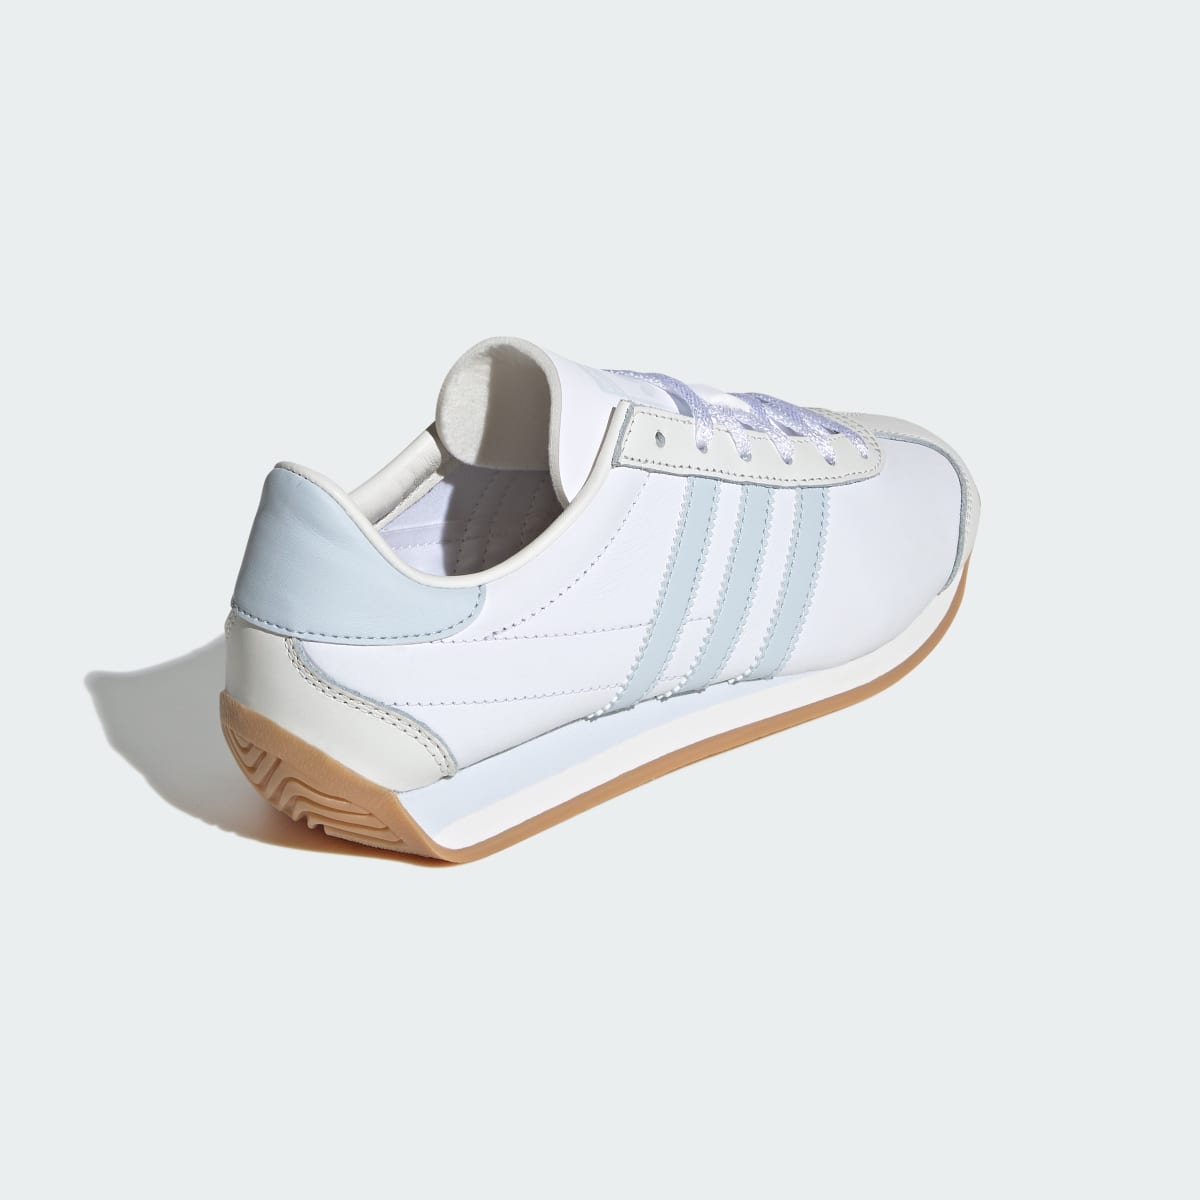 Adidas Chaussure Country OG. 6